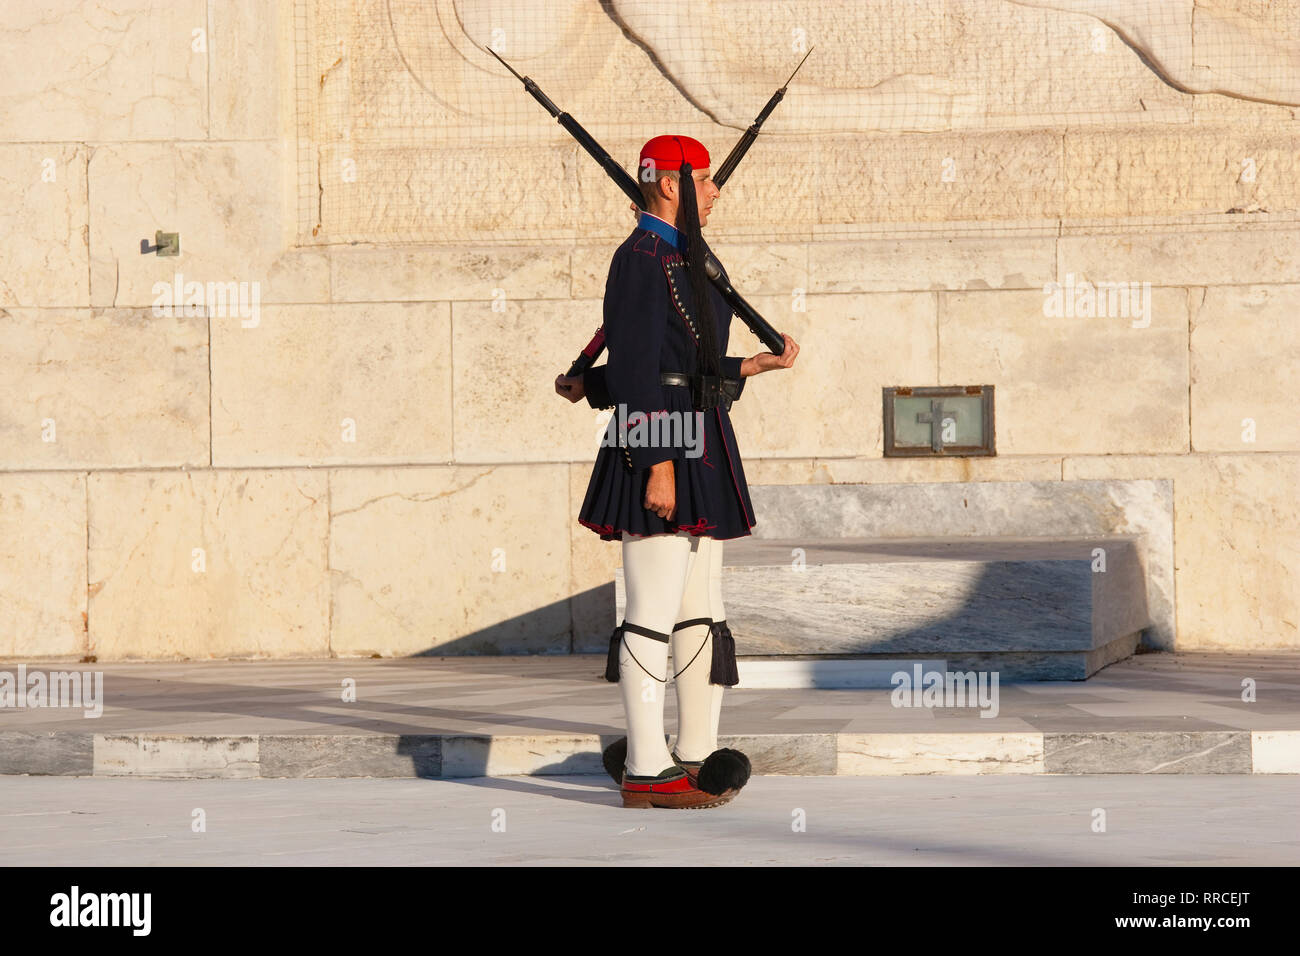 Greece, Attica, Athens, Evzones Greek soldiers on parade outside the Parliament building. Stock Photo